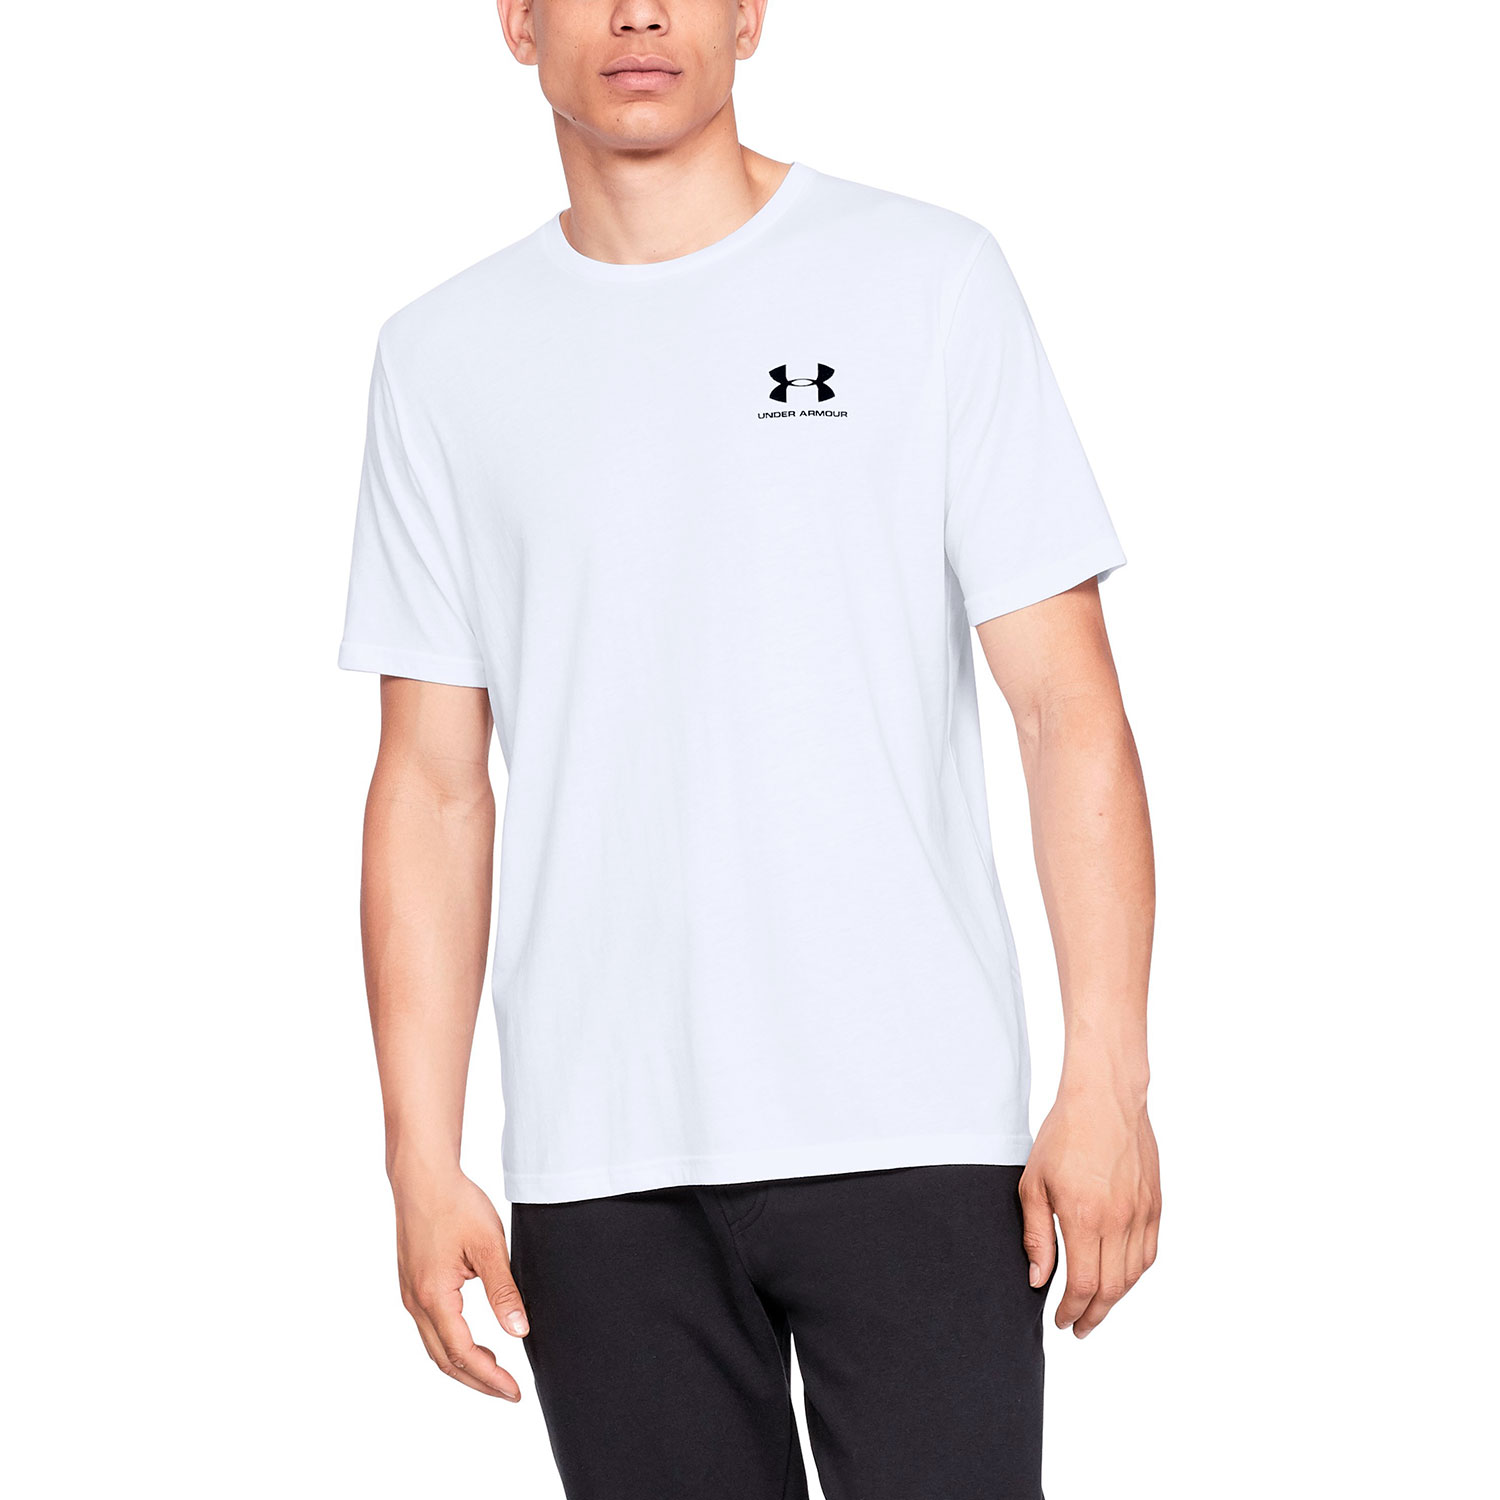 Under Armour Sportstyle Left Chest T-Shirt - White